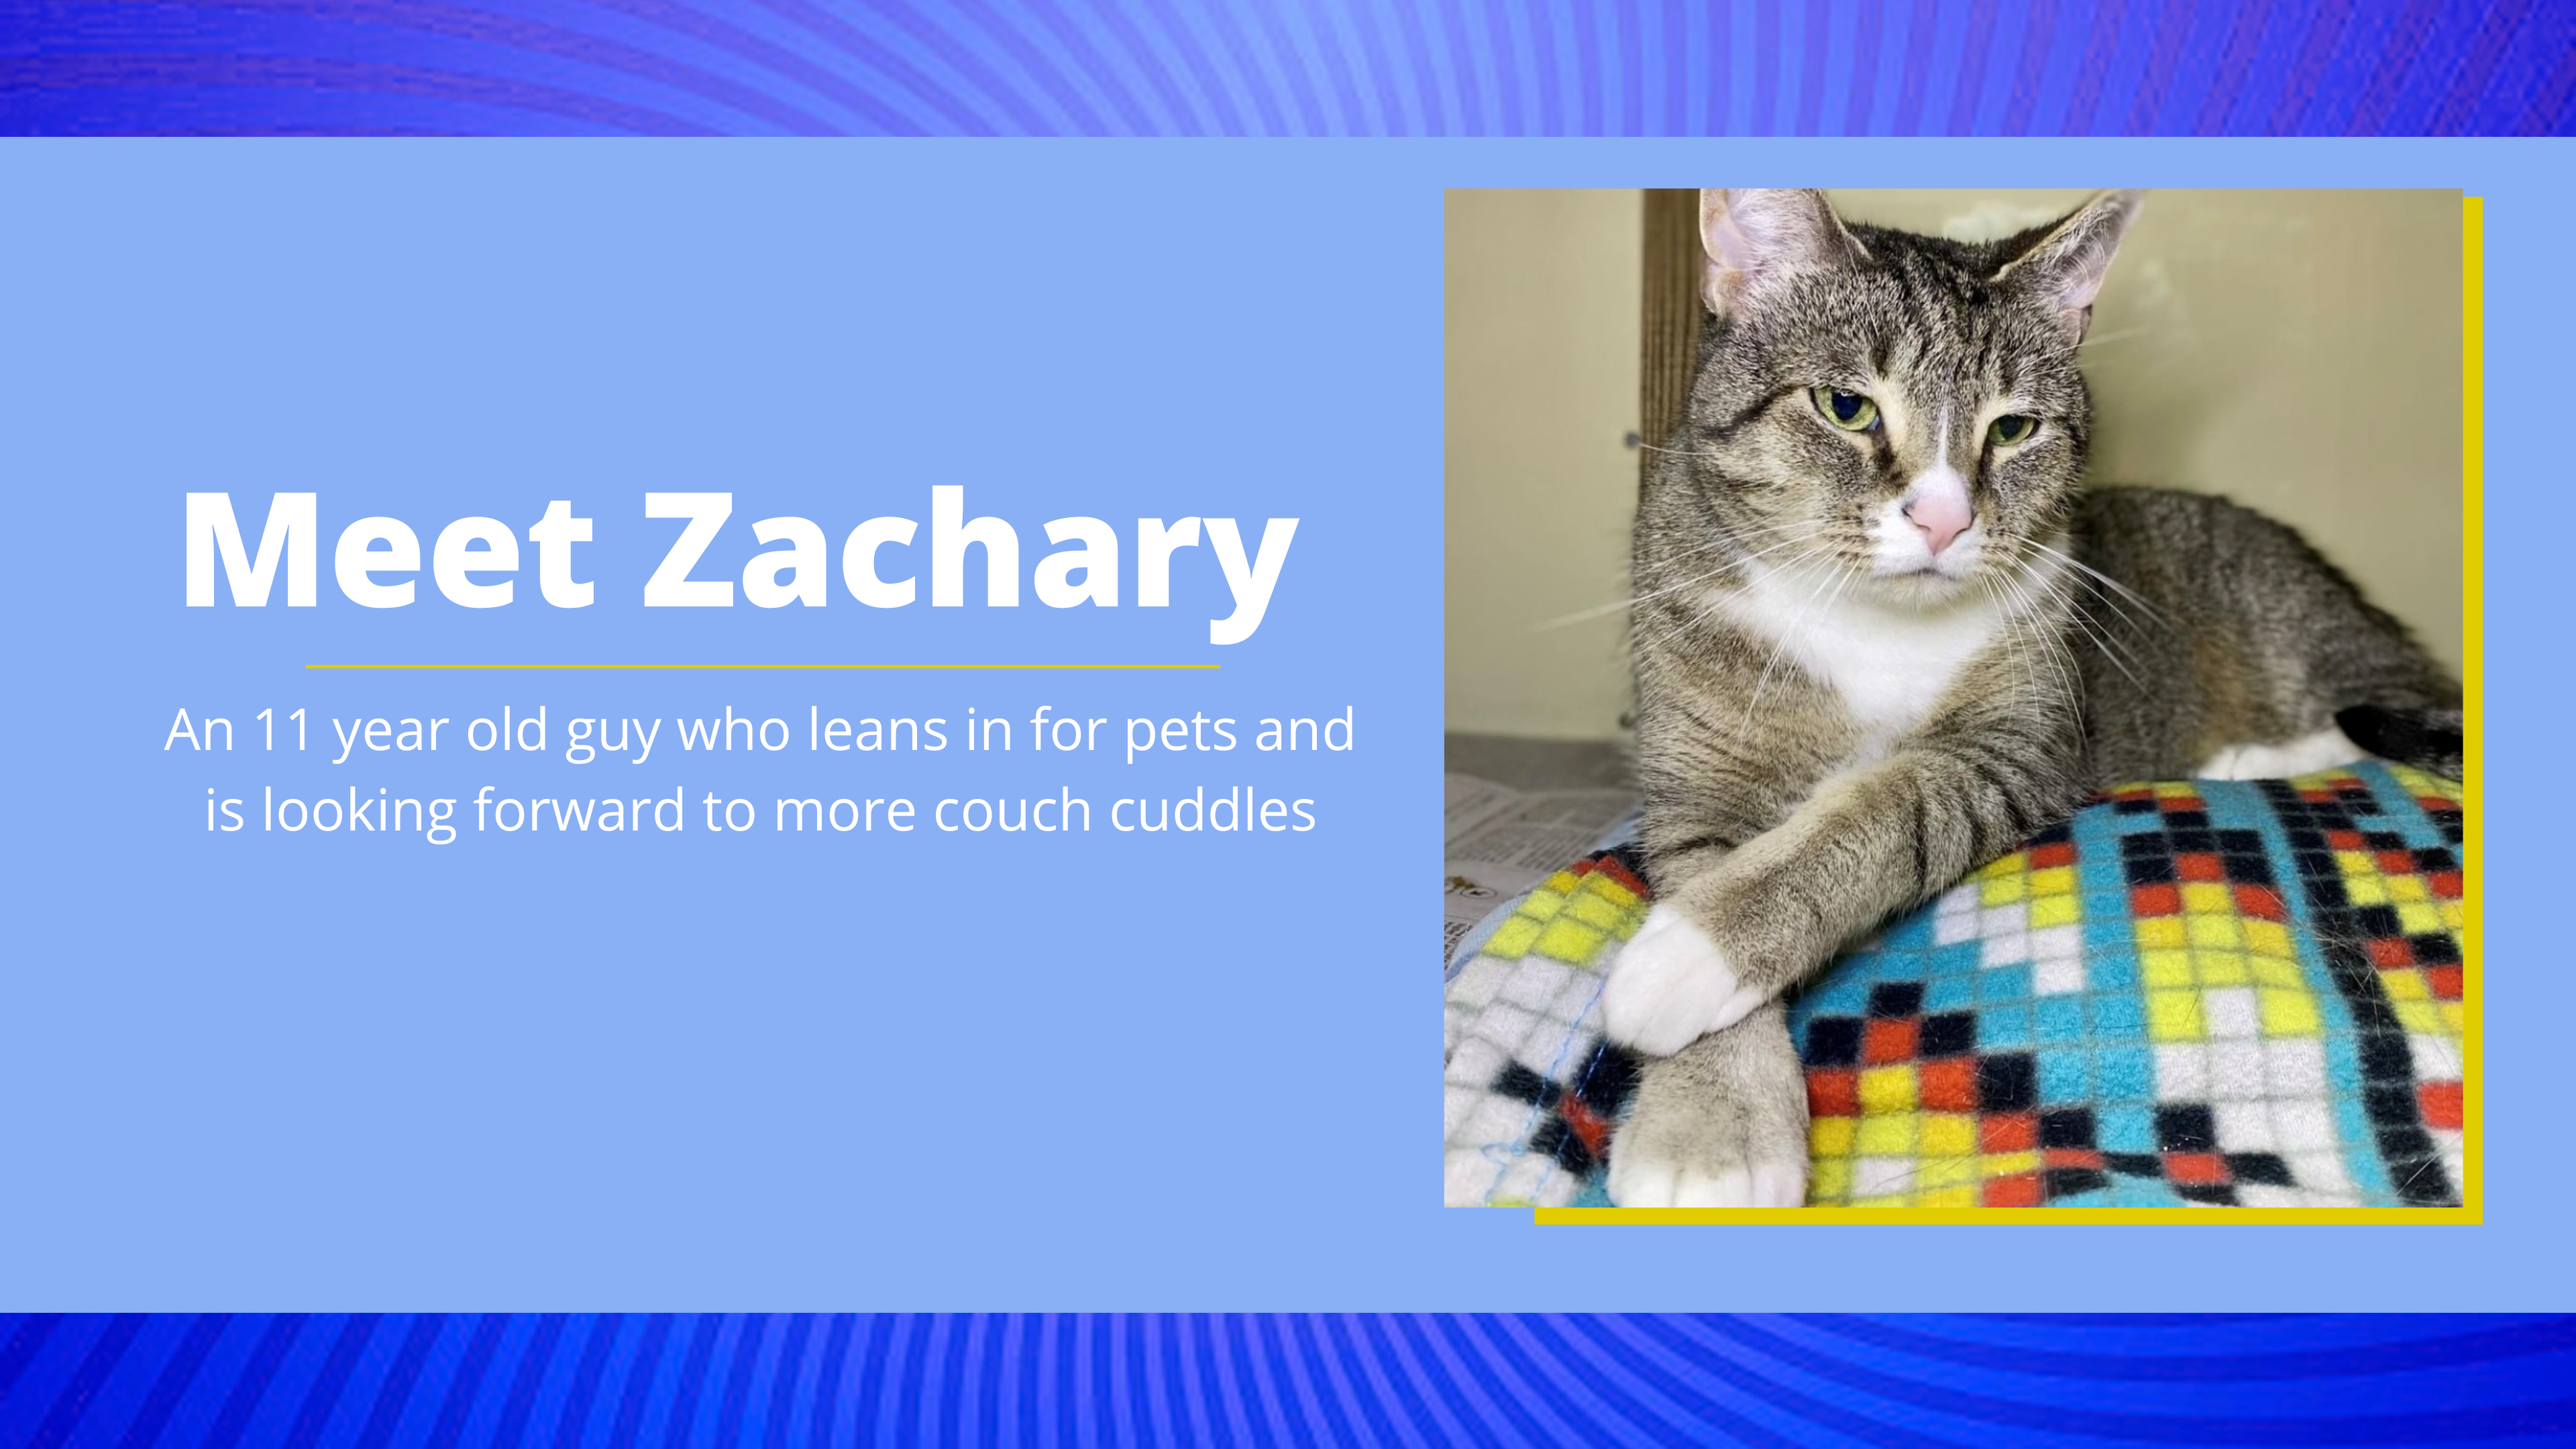 Zachary is a sweet 11 year old cat and is available for adoption in Beacon